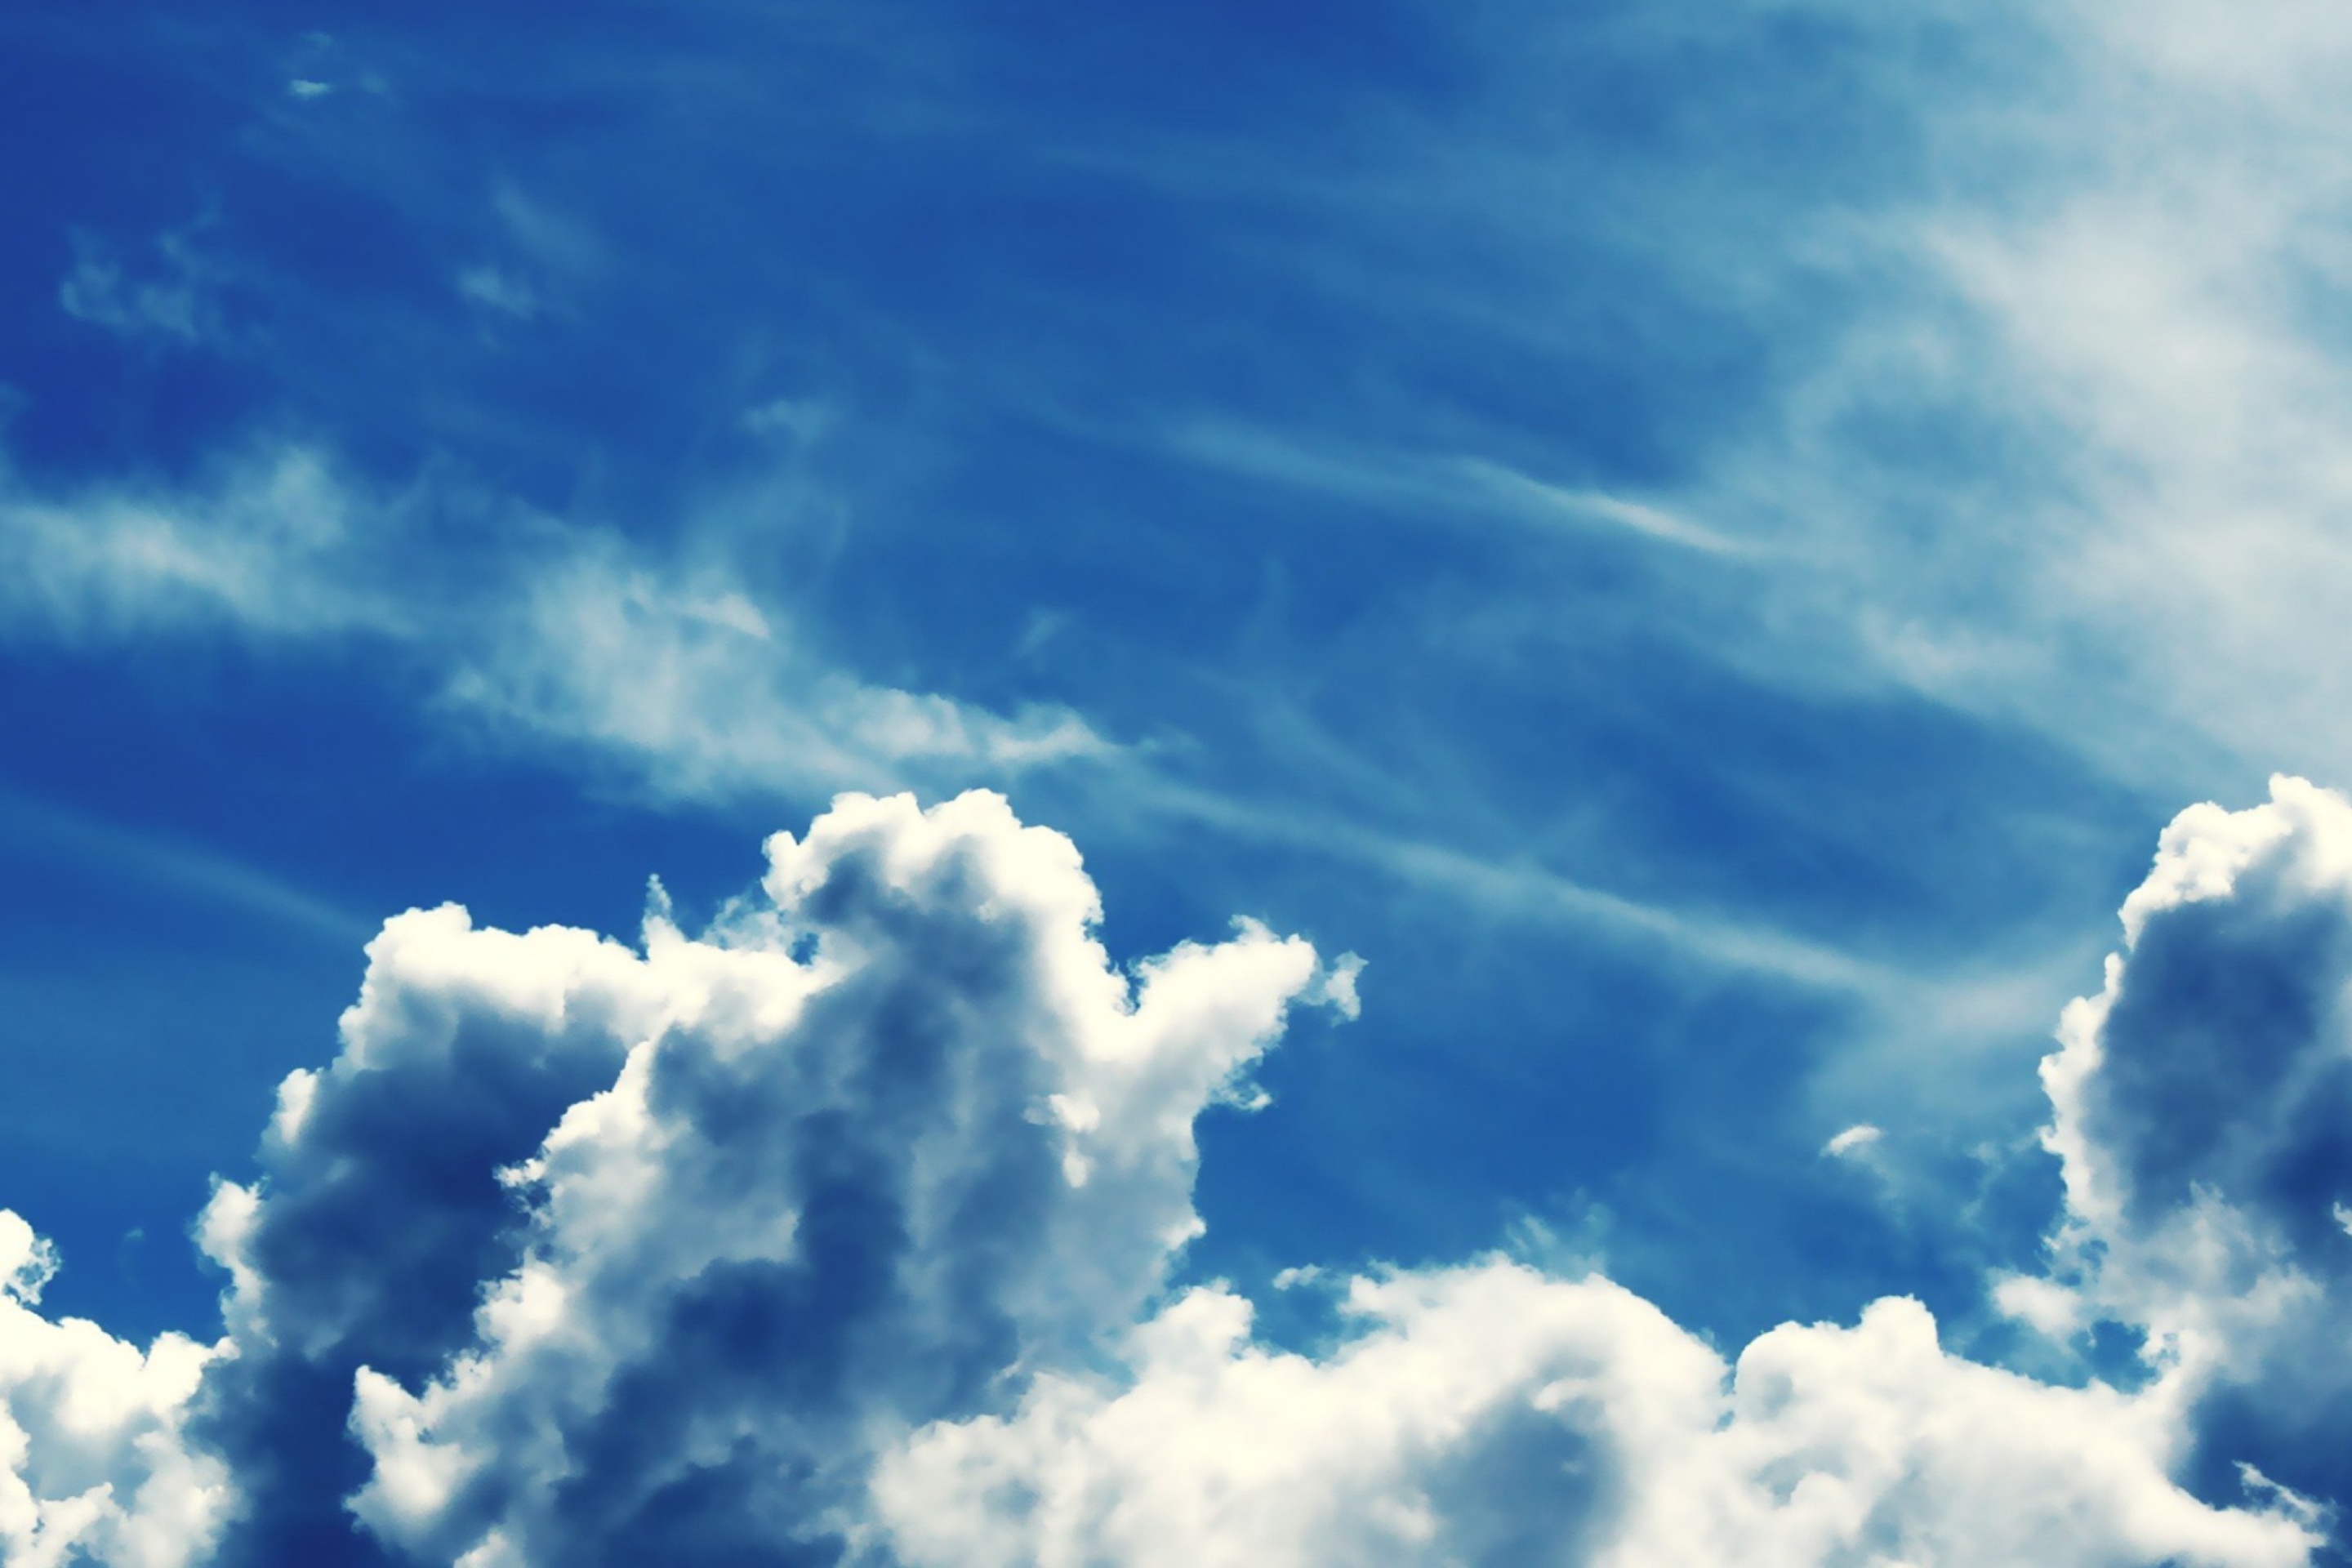 Das Blue Sky With Clouds Wallpaper 2880x1920